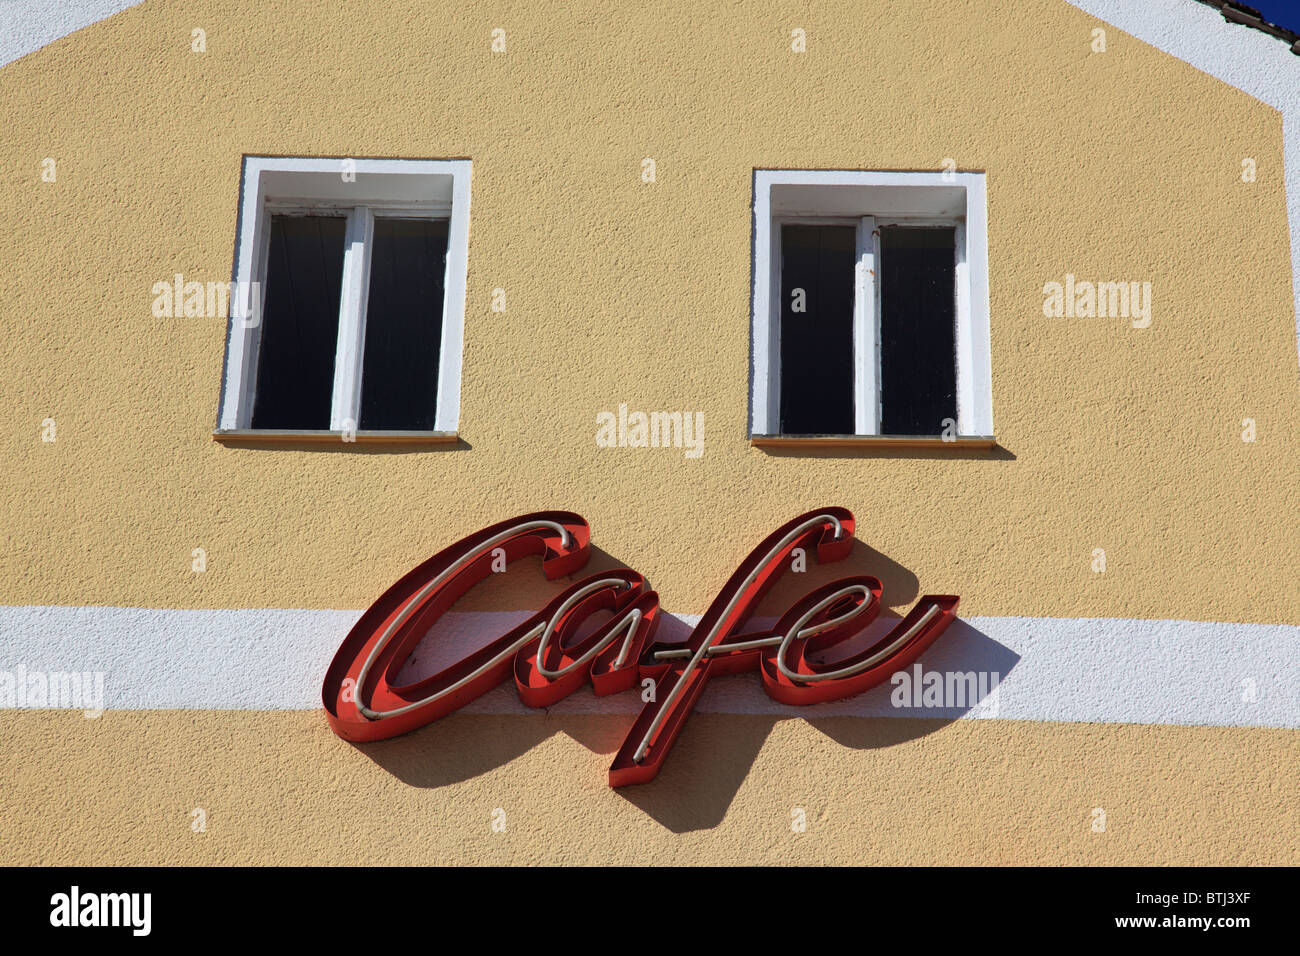 Cafe on facade in the village Kallmuenz Upper Palatinate Bavaria Germany. Photo by Willy Matheisl Stock Photo